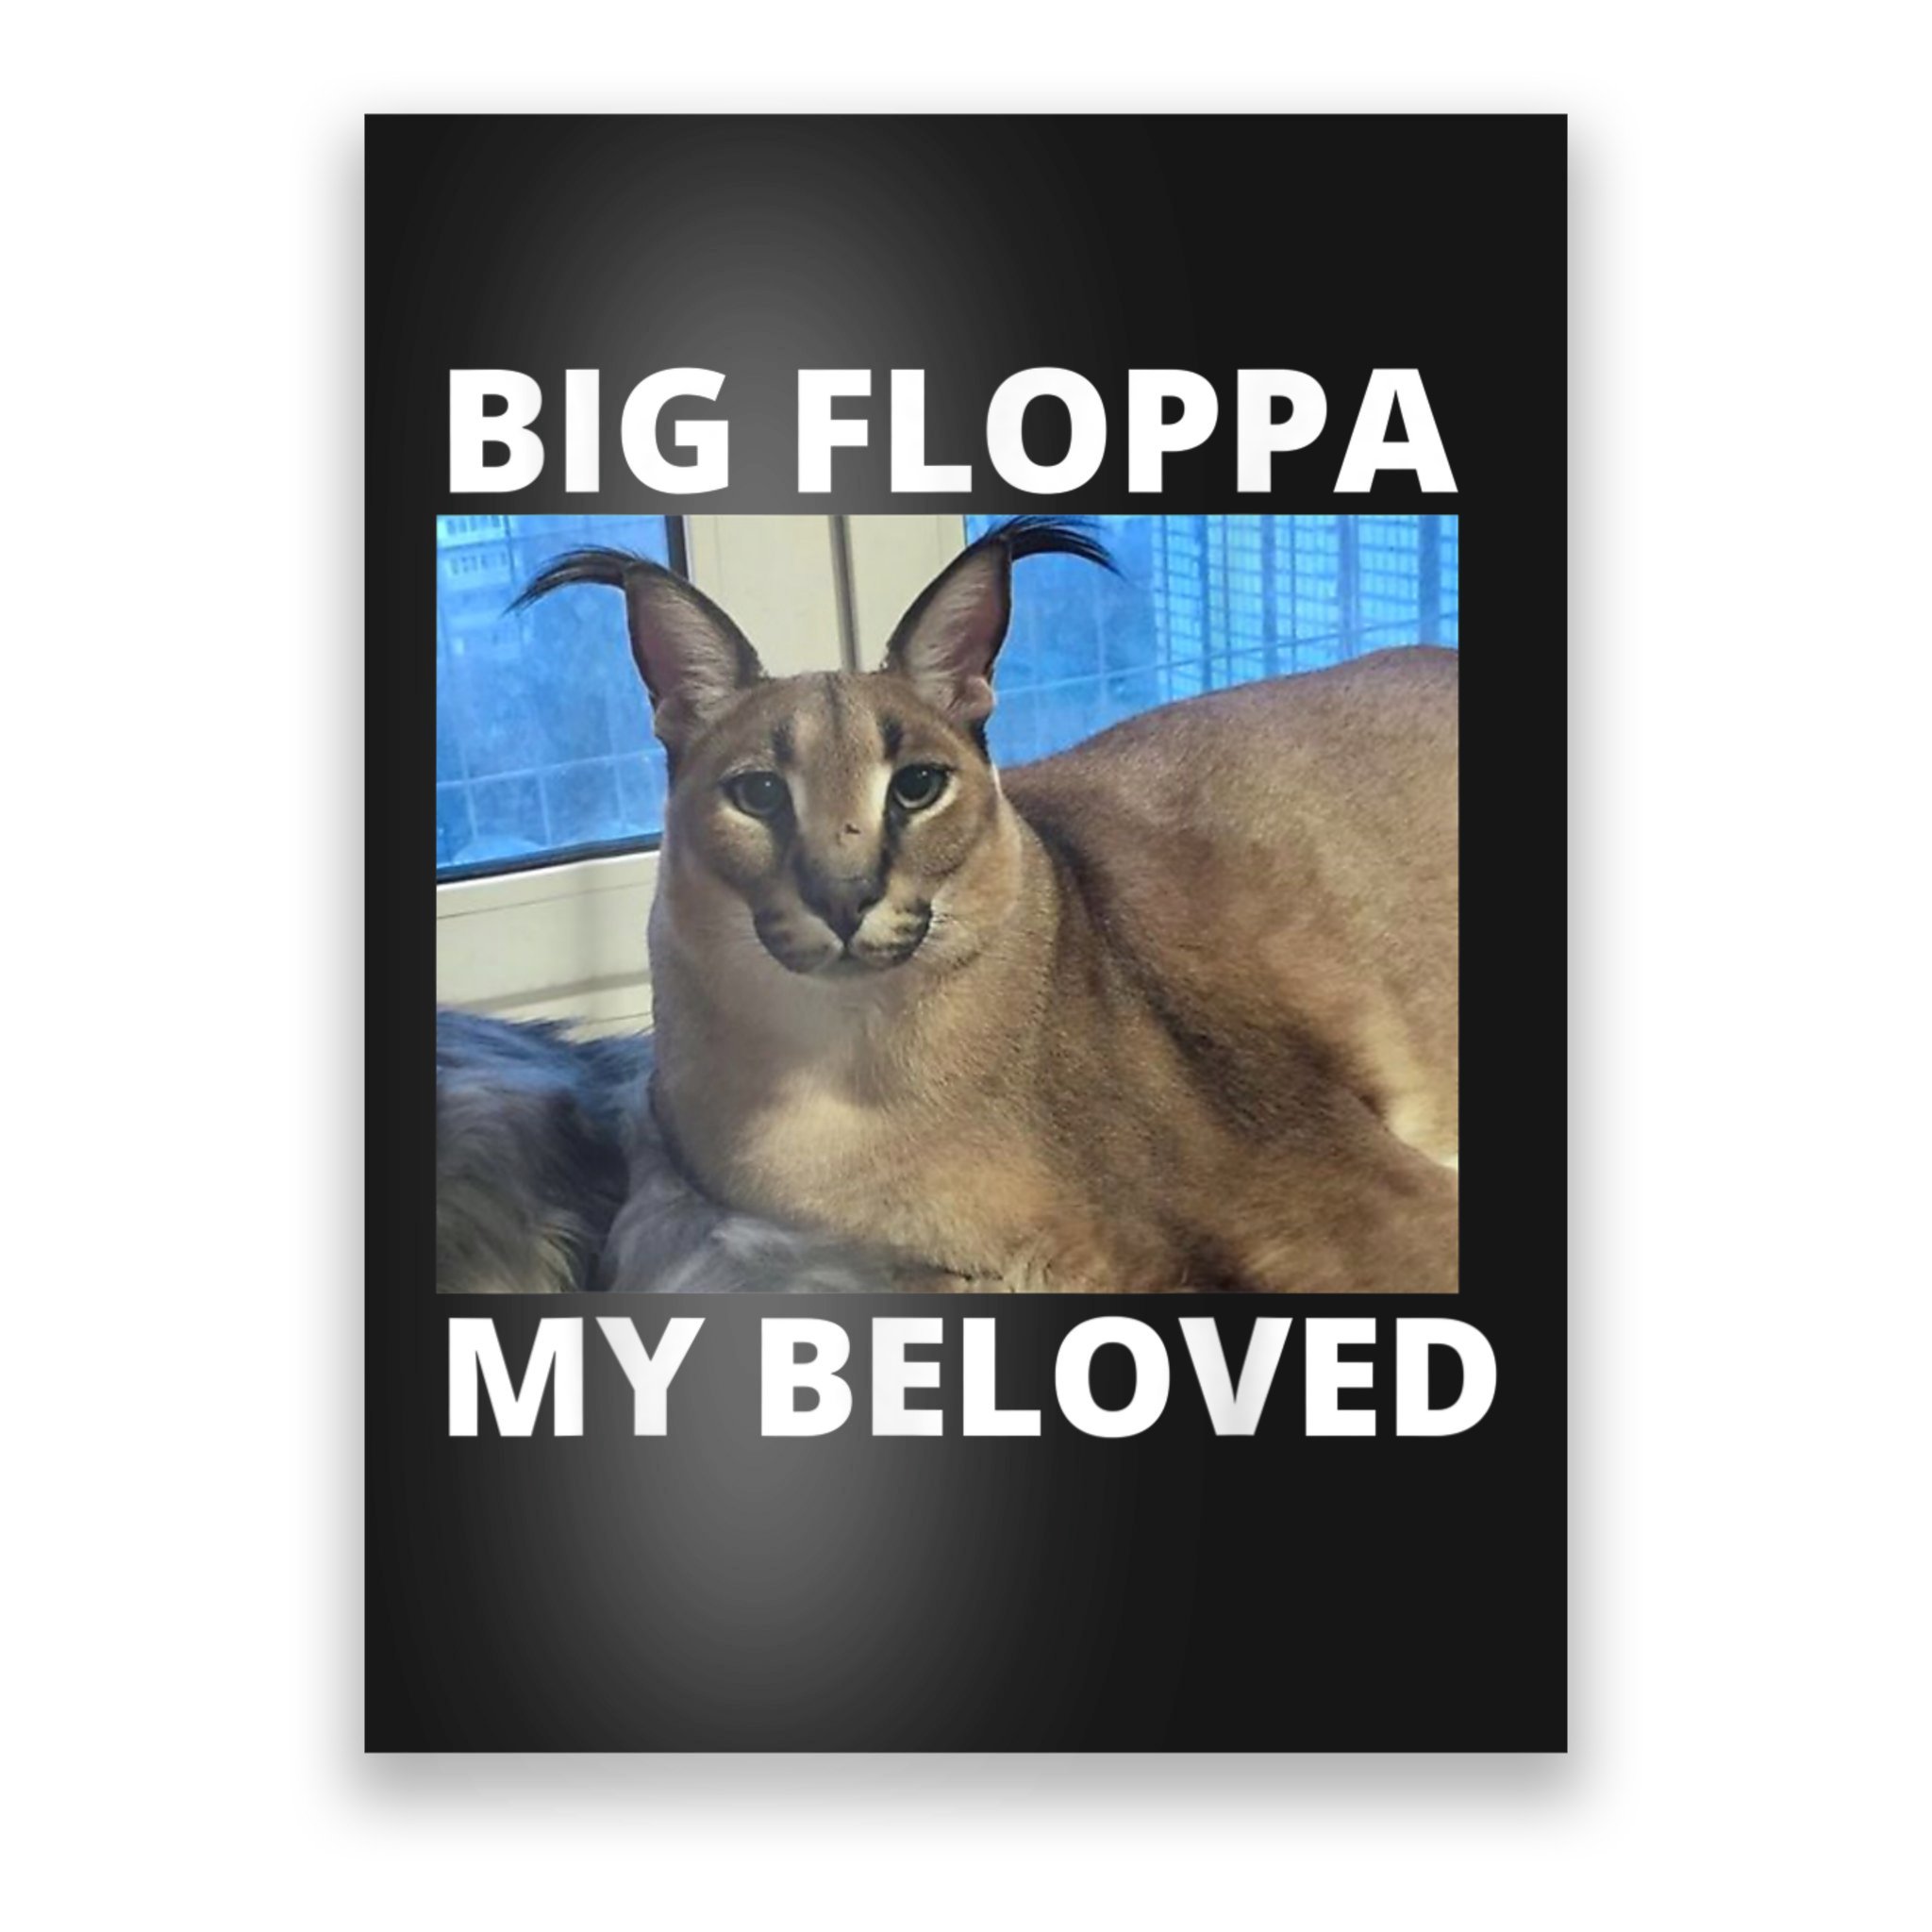 floppa  Cat memes, Silly cats pictures, Memes